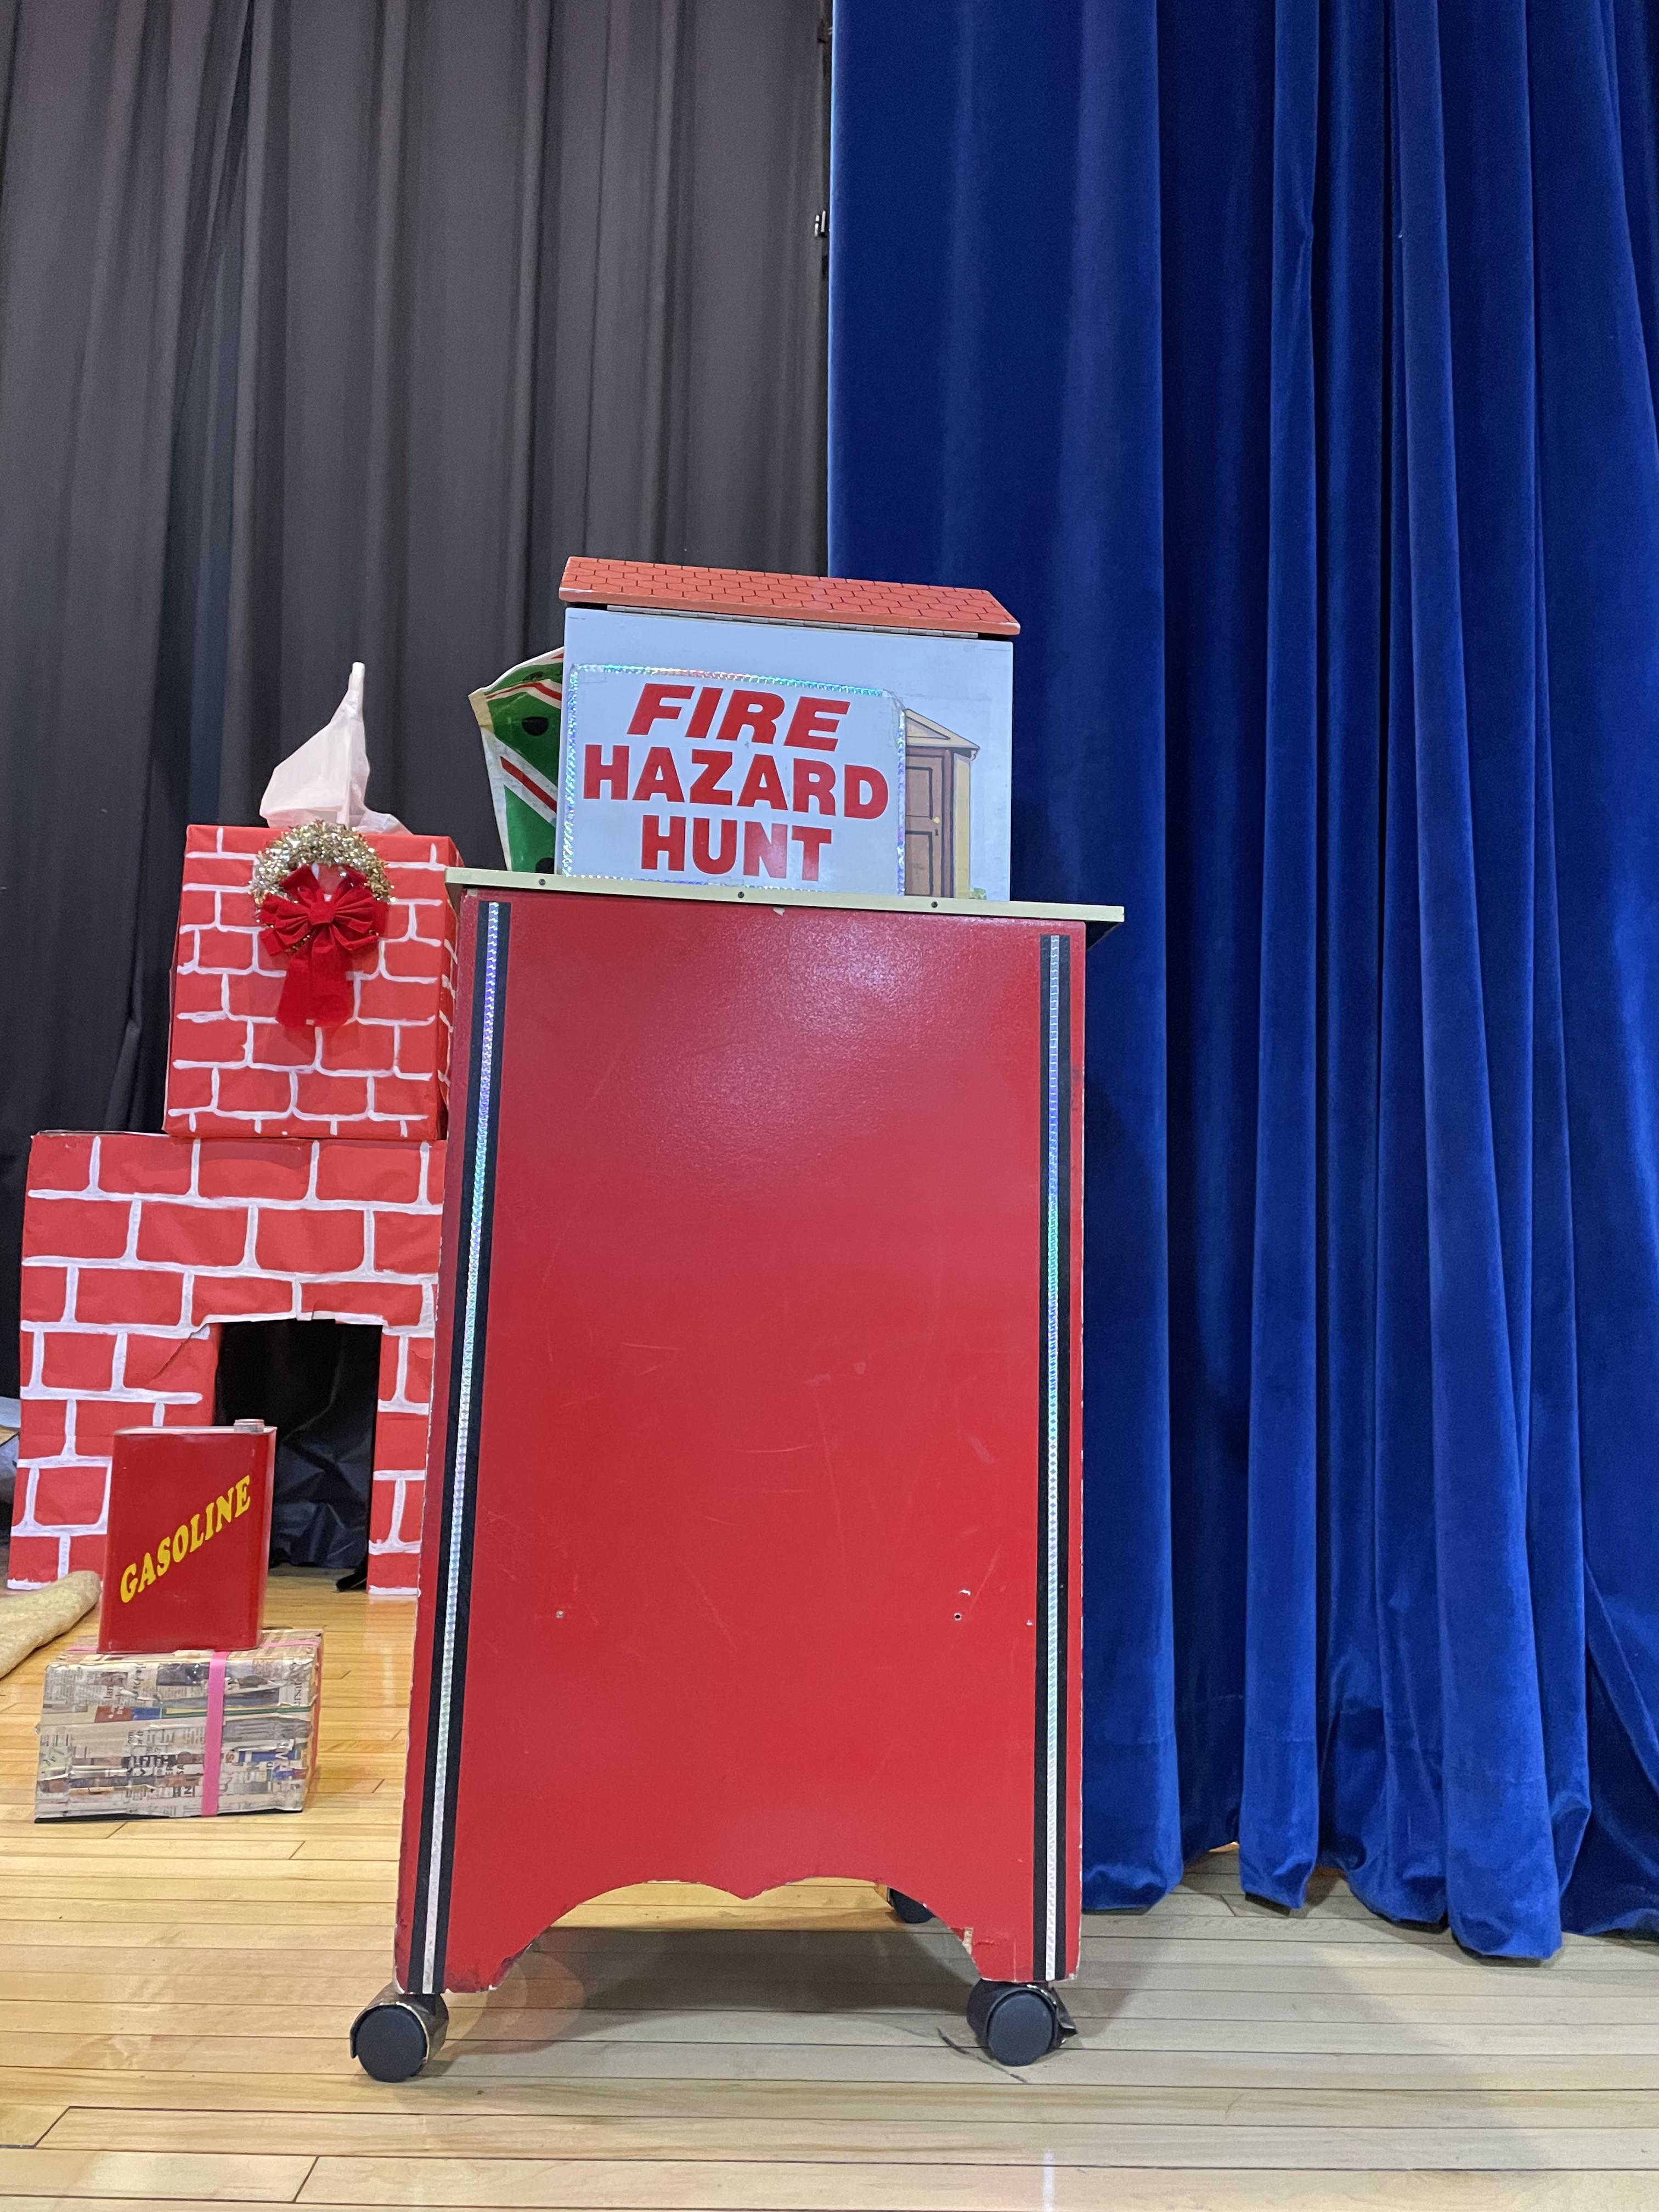 The Importance of Fire Safety at the Washington School